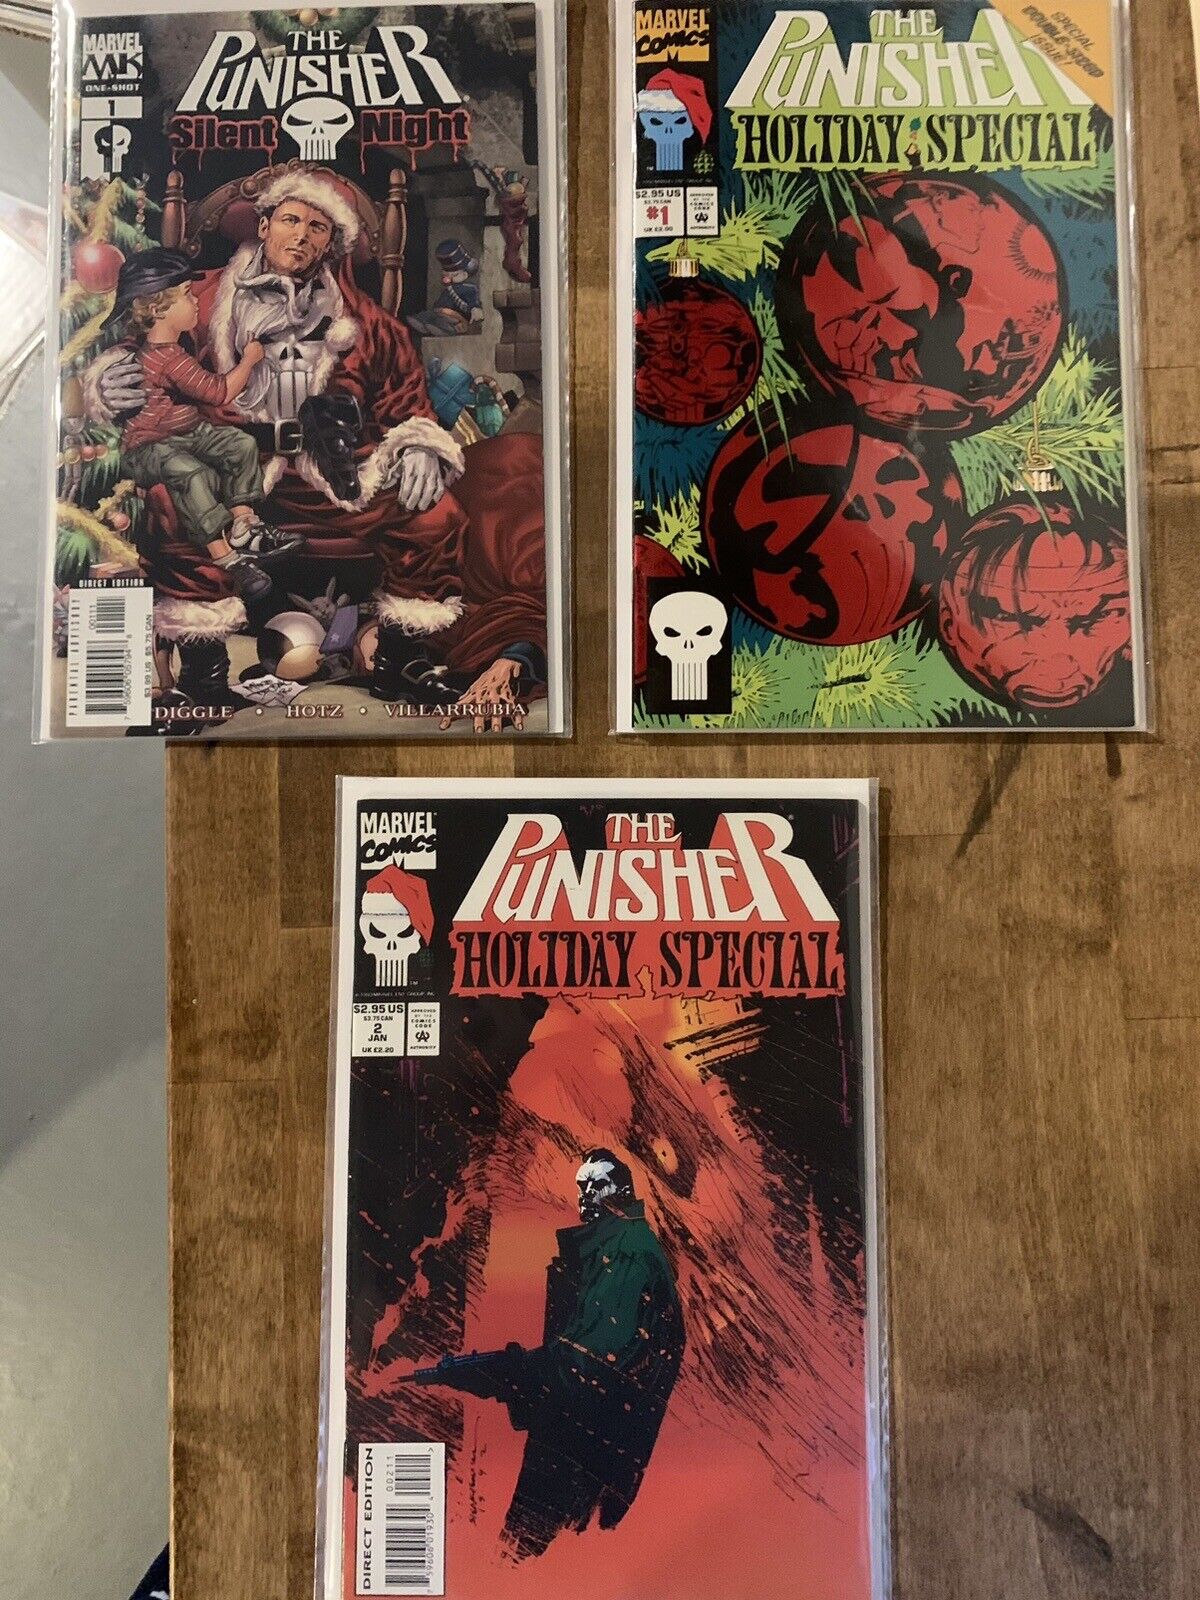 The Punisher Holiday Special Bundle -Special 1, 2 and Silent night - GREAT GIFT